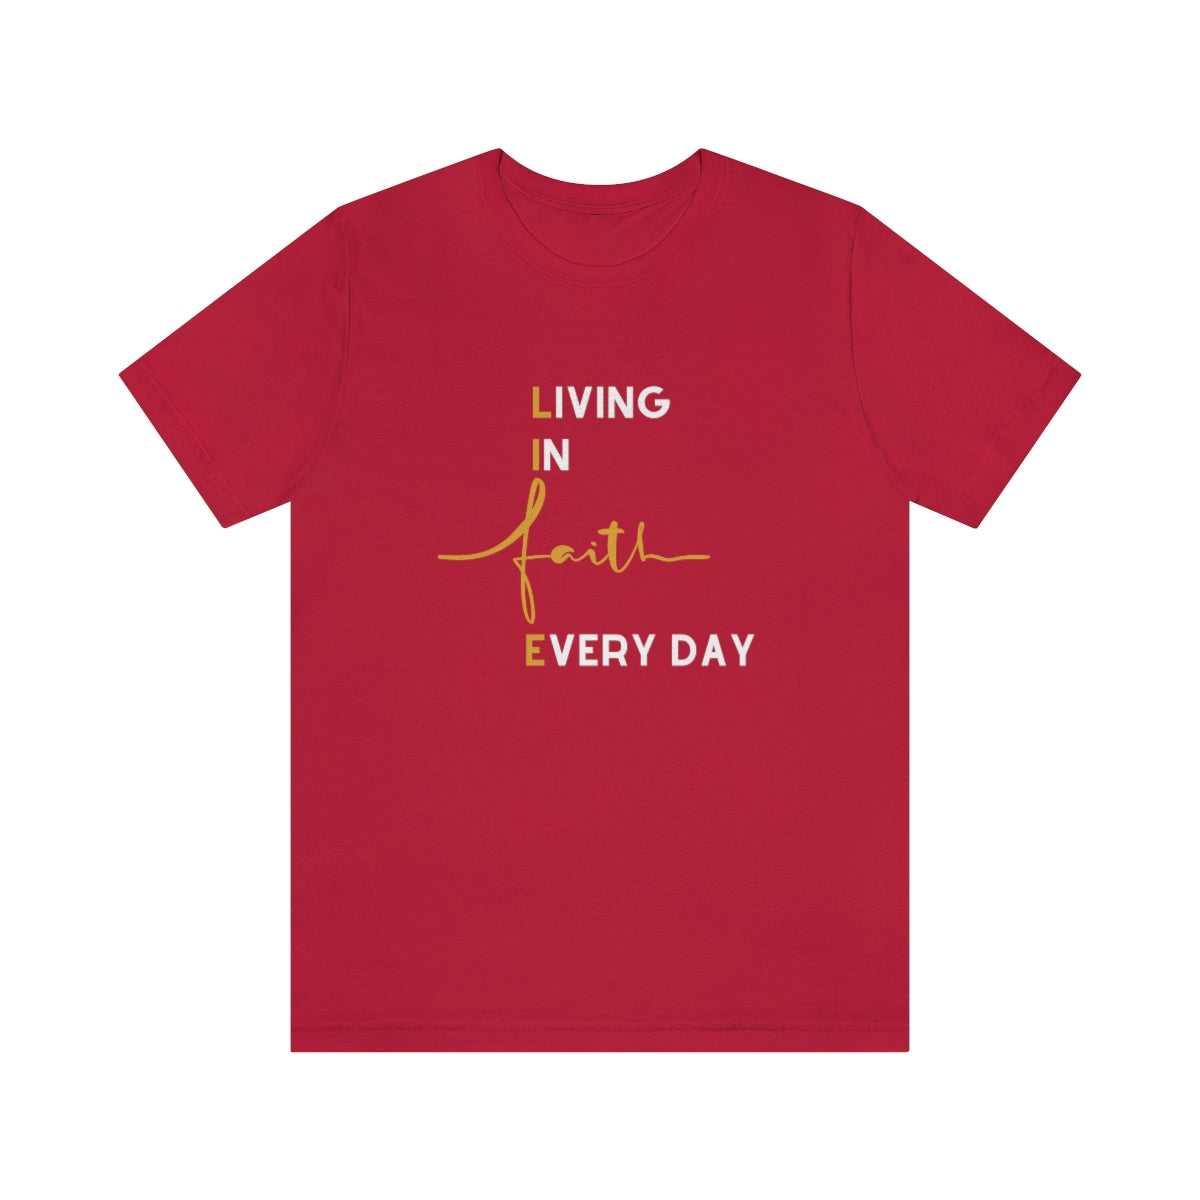 LIFE: LIVING IN FAITH EVERY DAY T-SHIRT-T-Shirt-Red-S-mysticalcherry